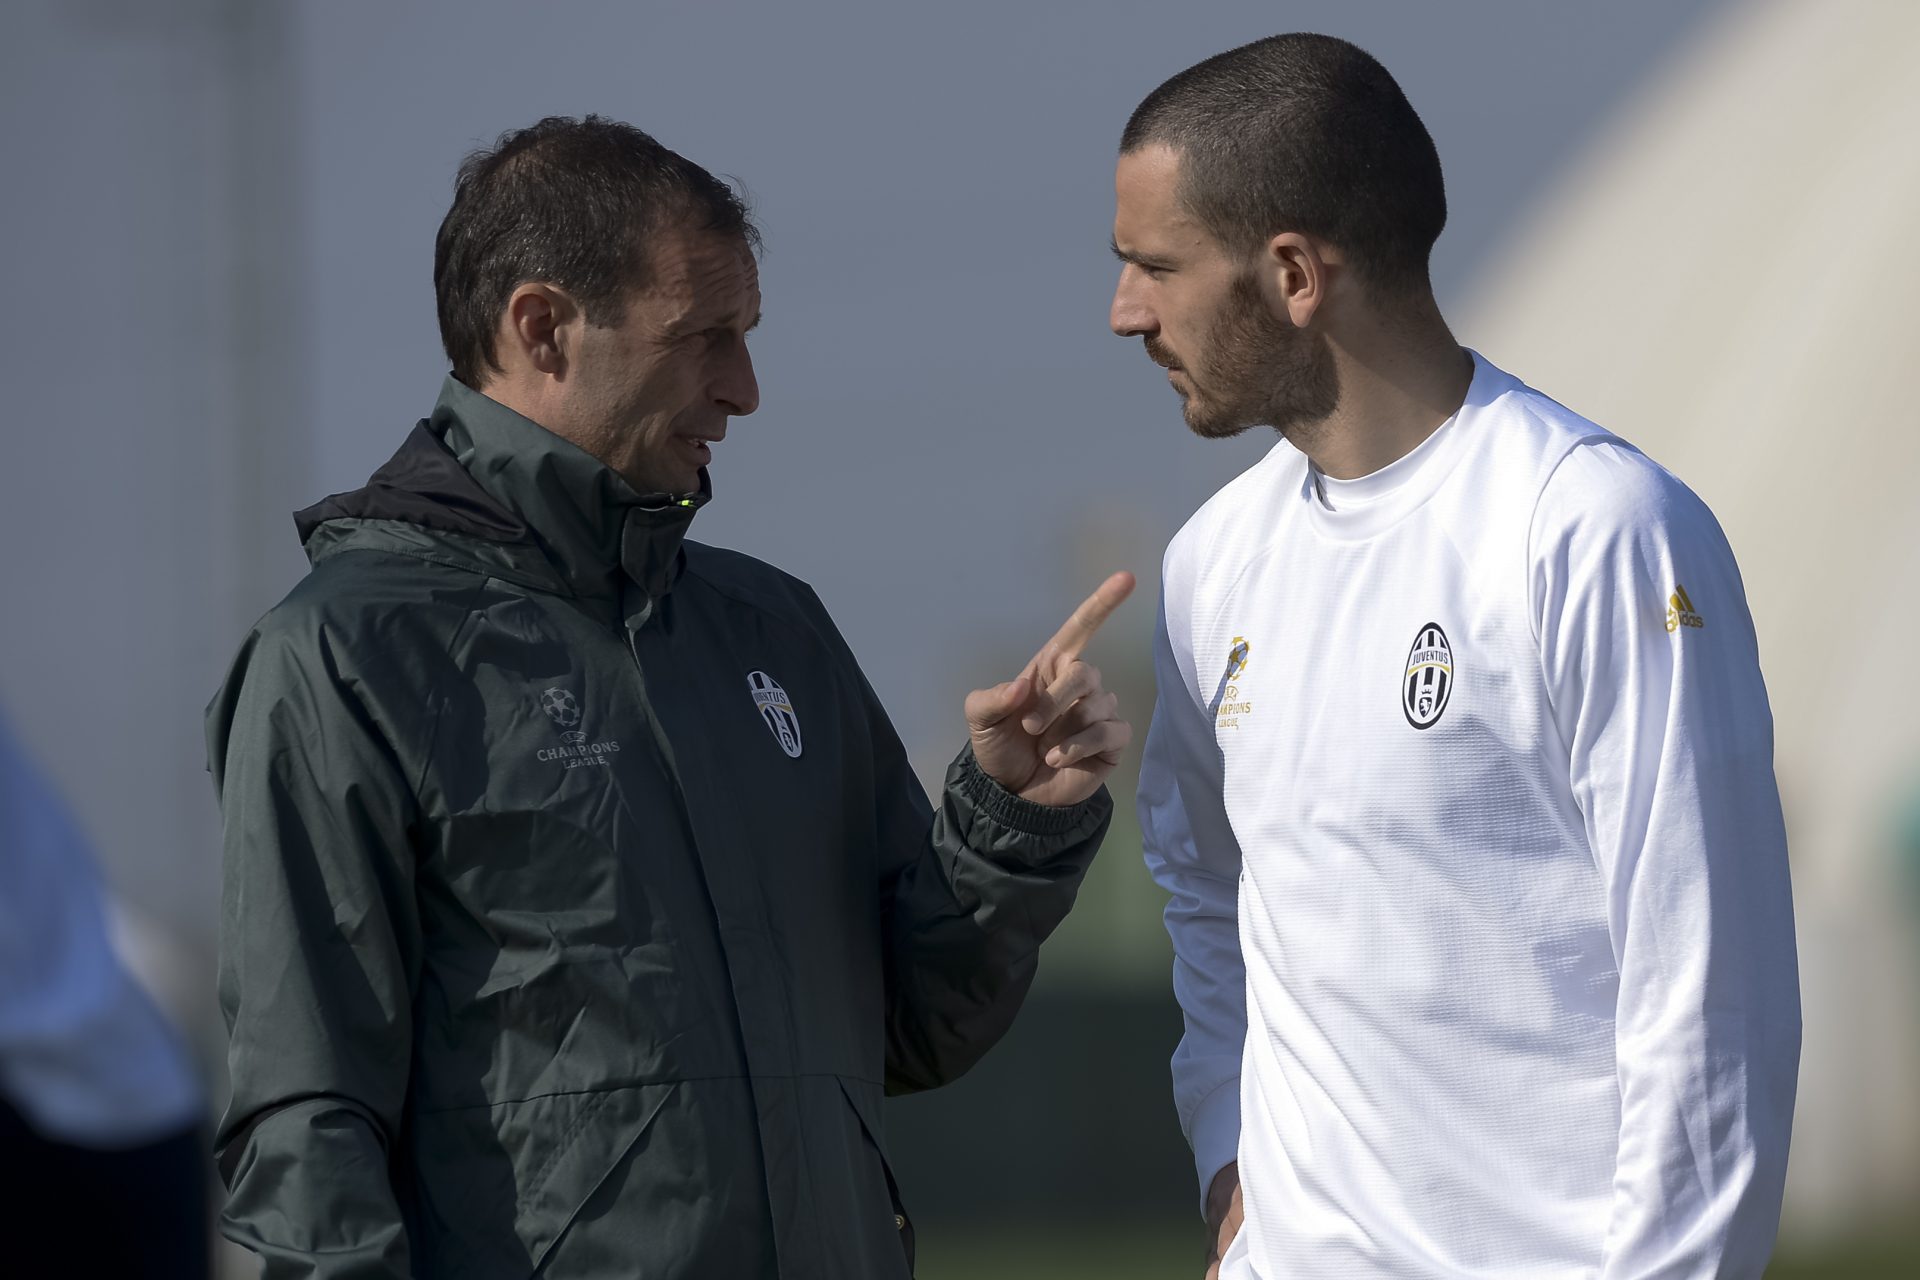 The difficult relationship with Allegri